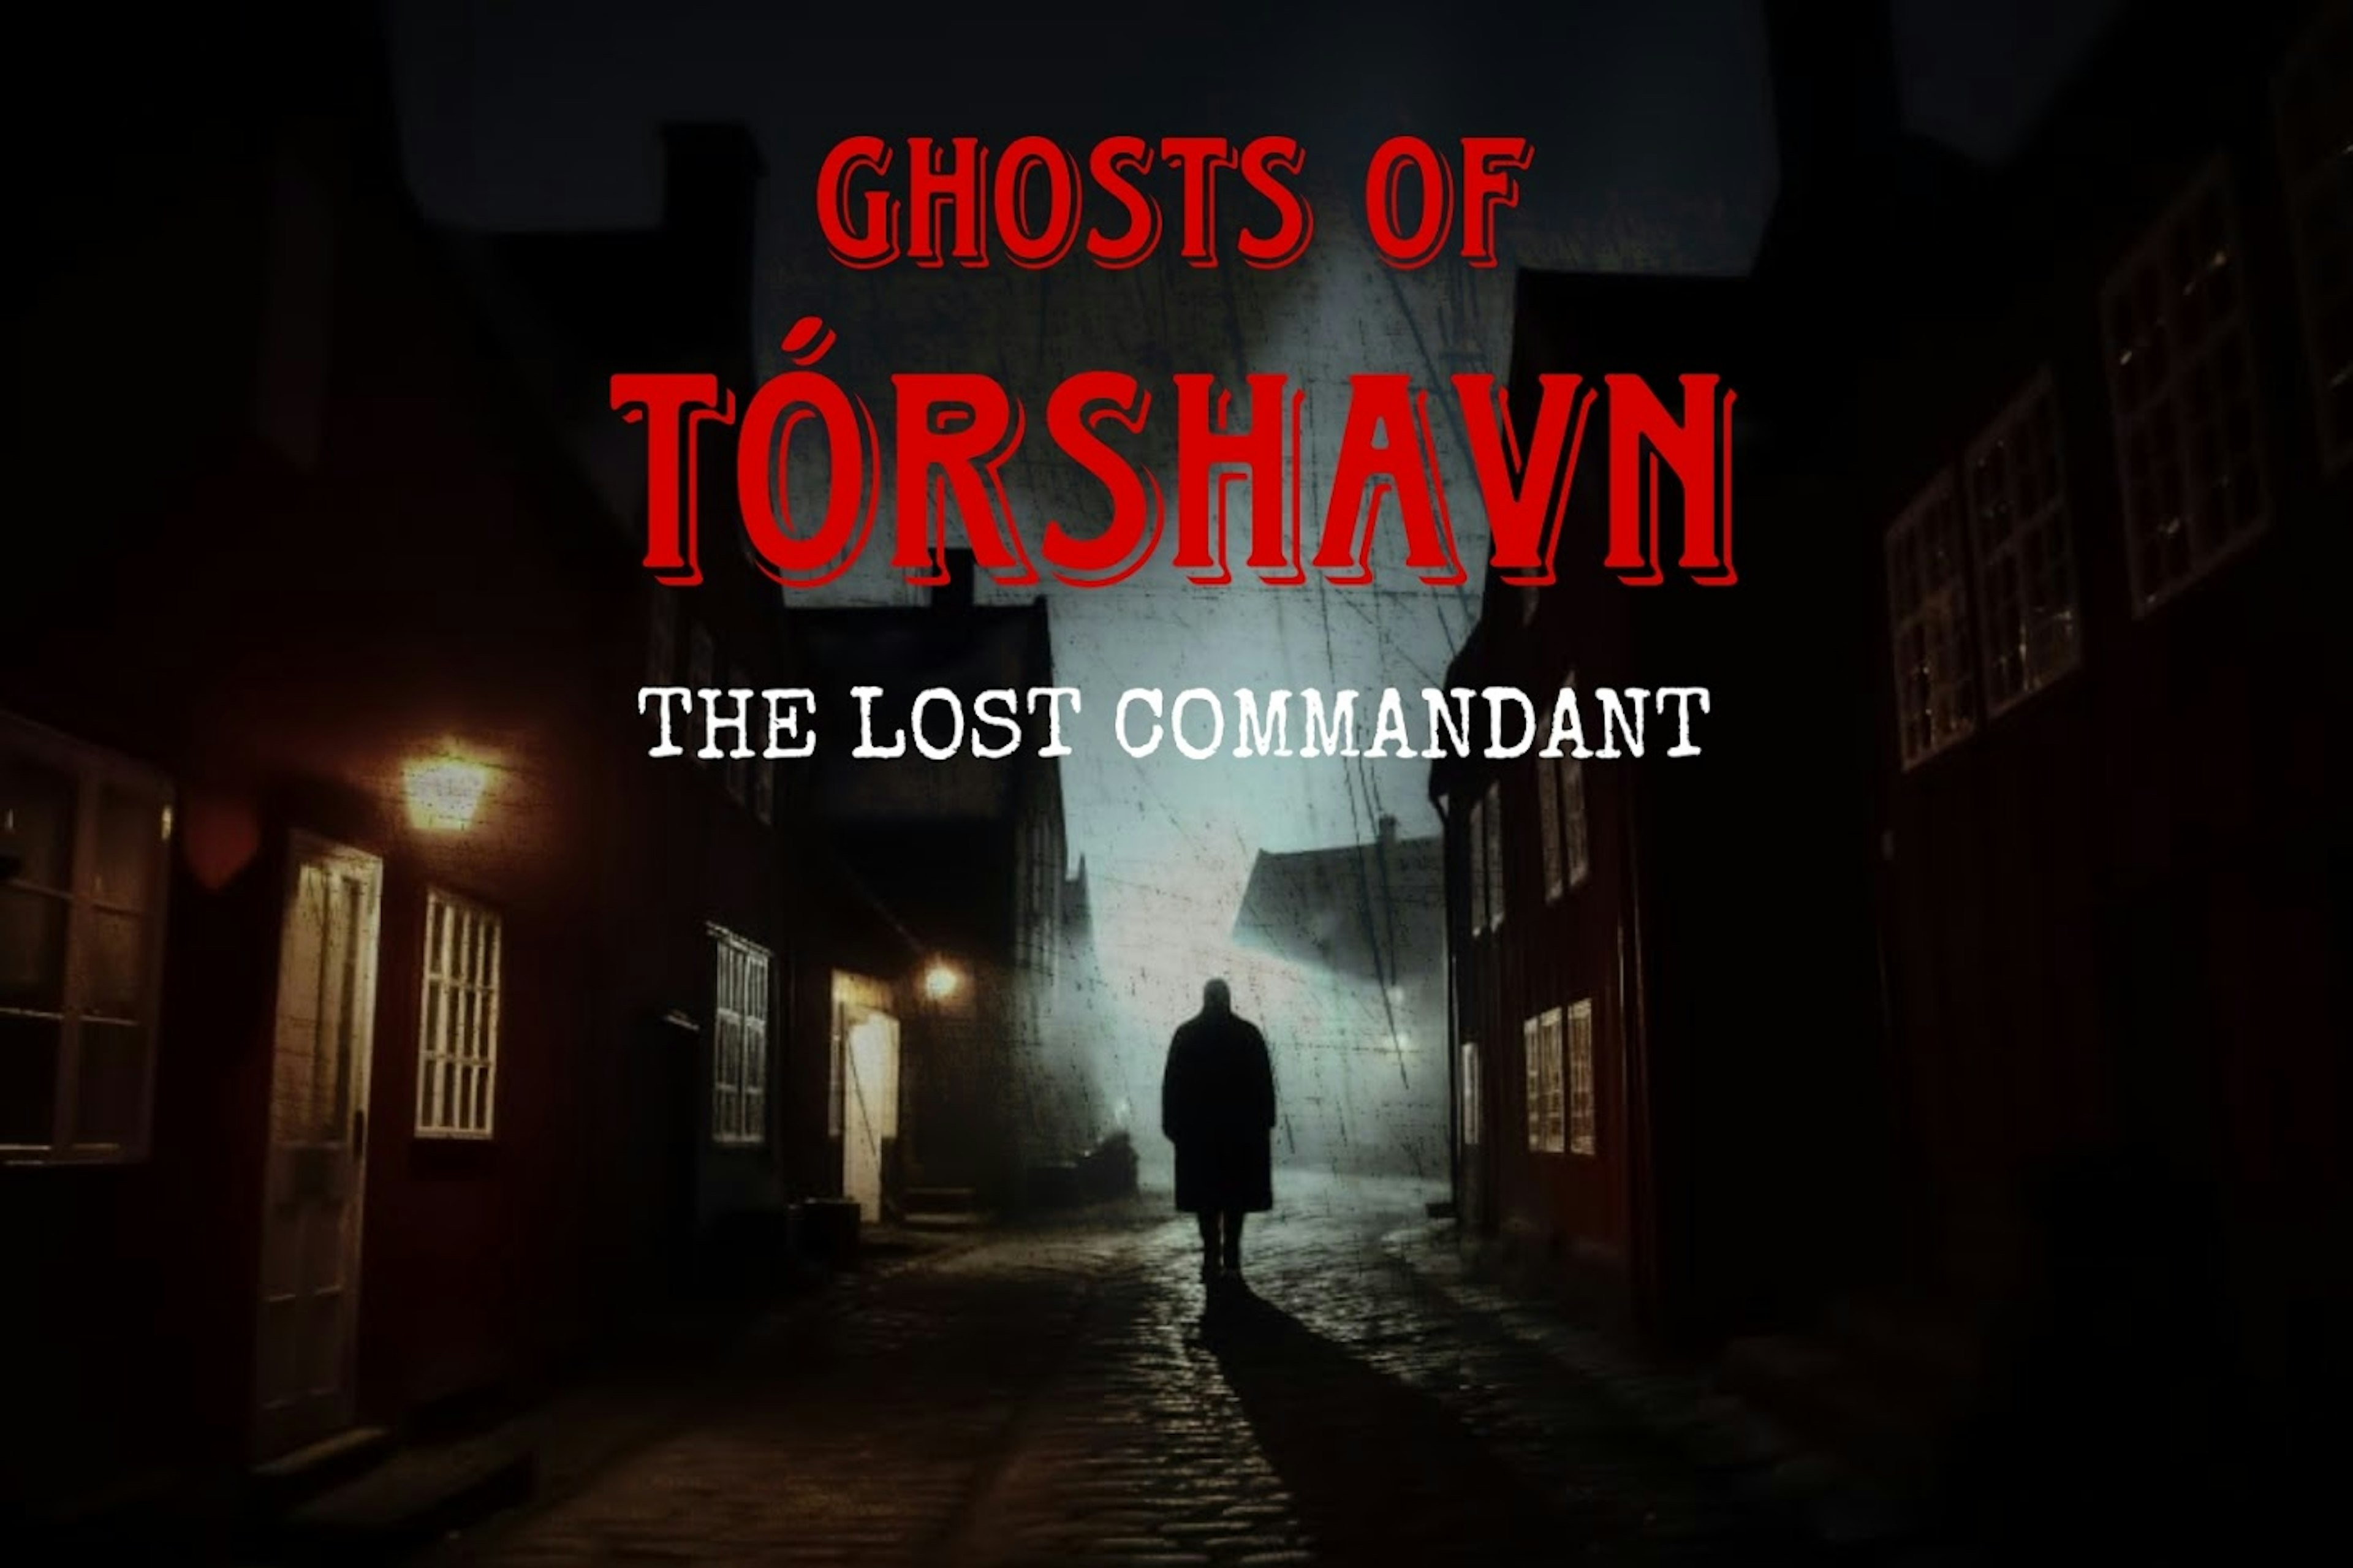 Ghosts of Thorshavn: The Lost Commandant